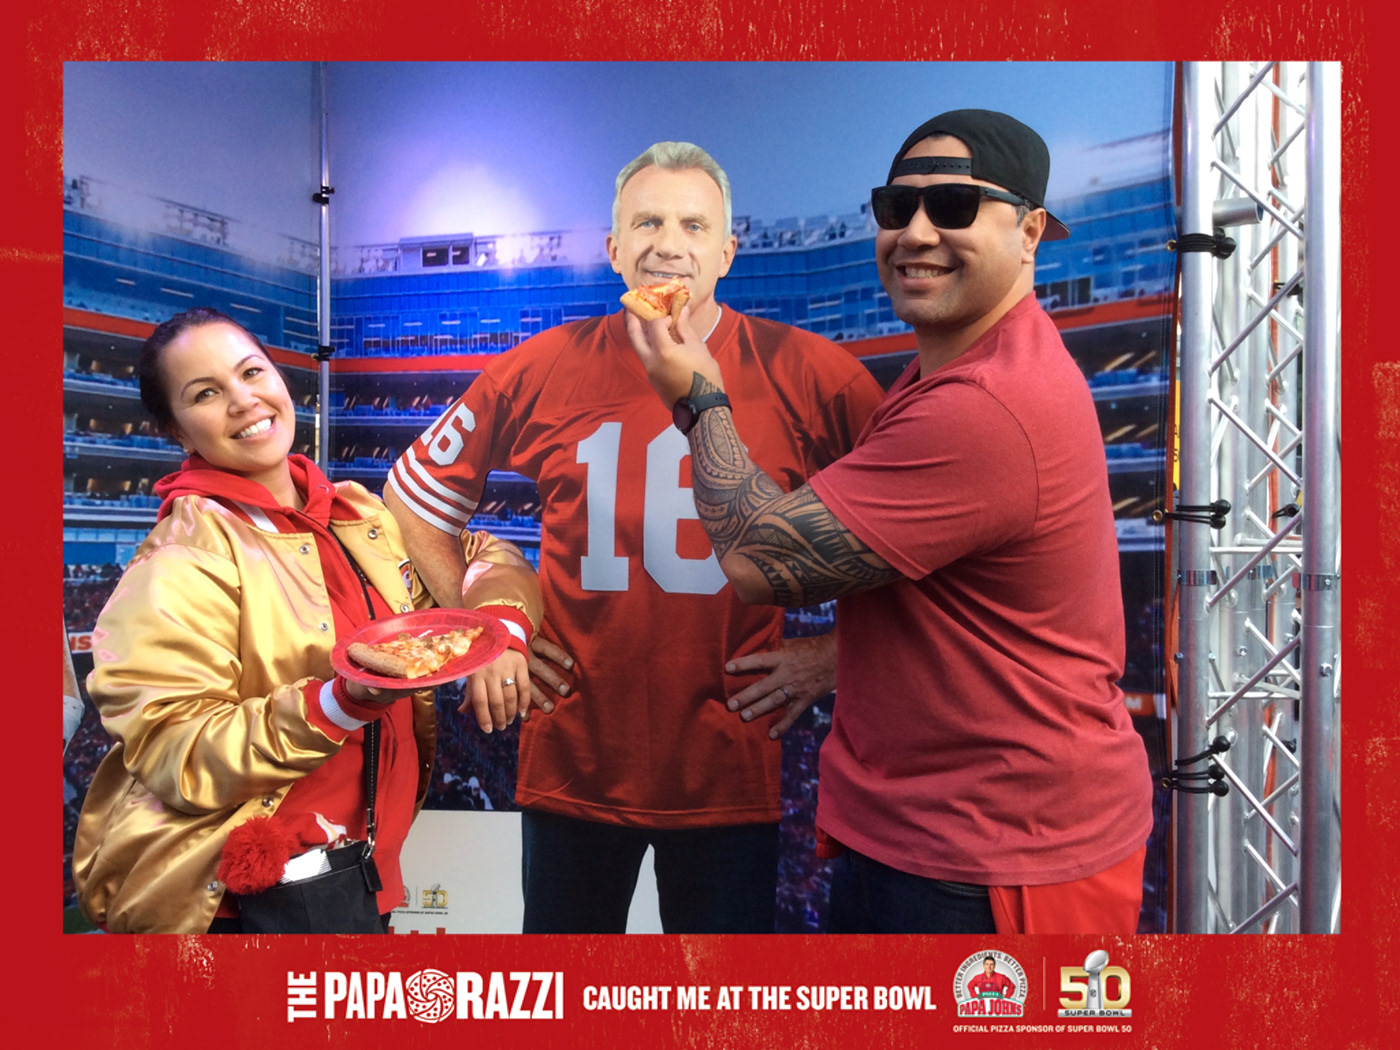 Pizza papa johns superbowl 50 Event Photo Opp football activation brand